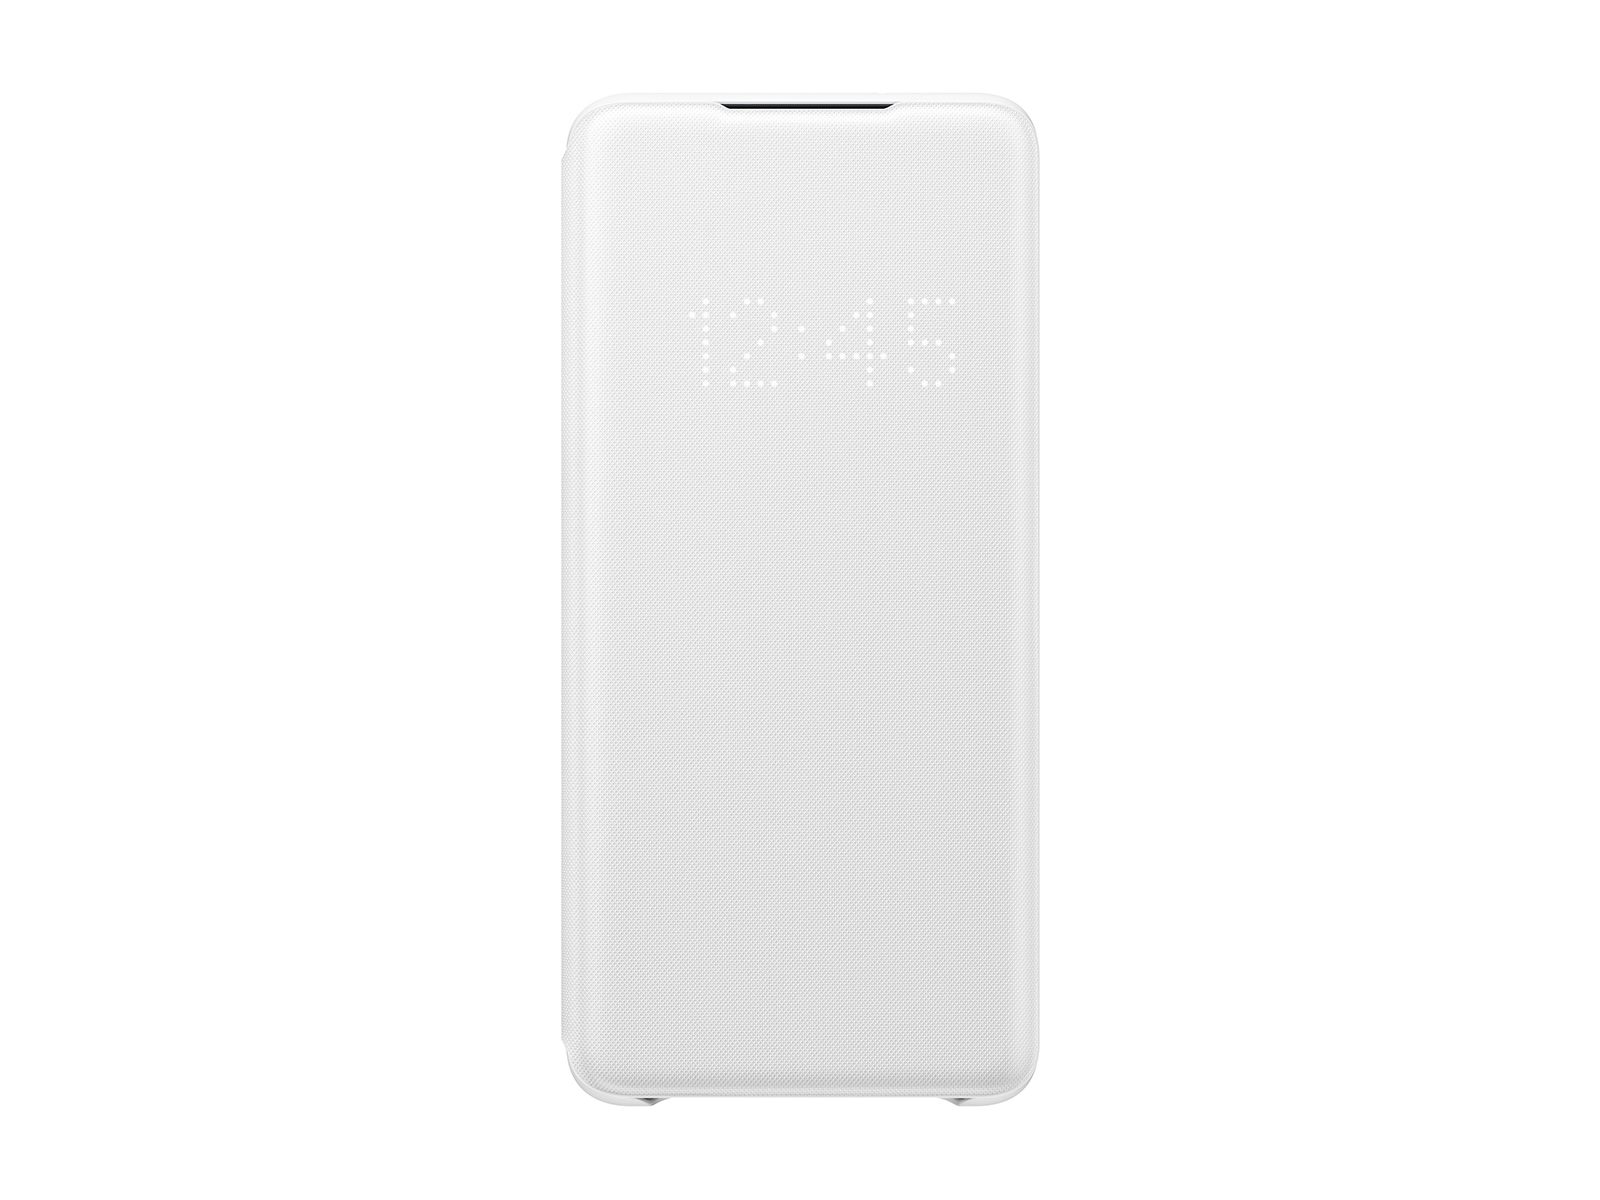 Thumbnail image of Galaxy S20+ 5G LED Wallet Cover, White